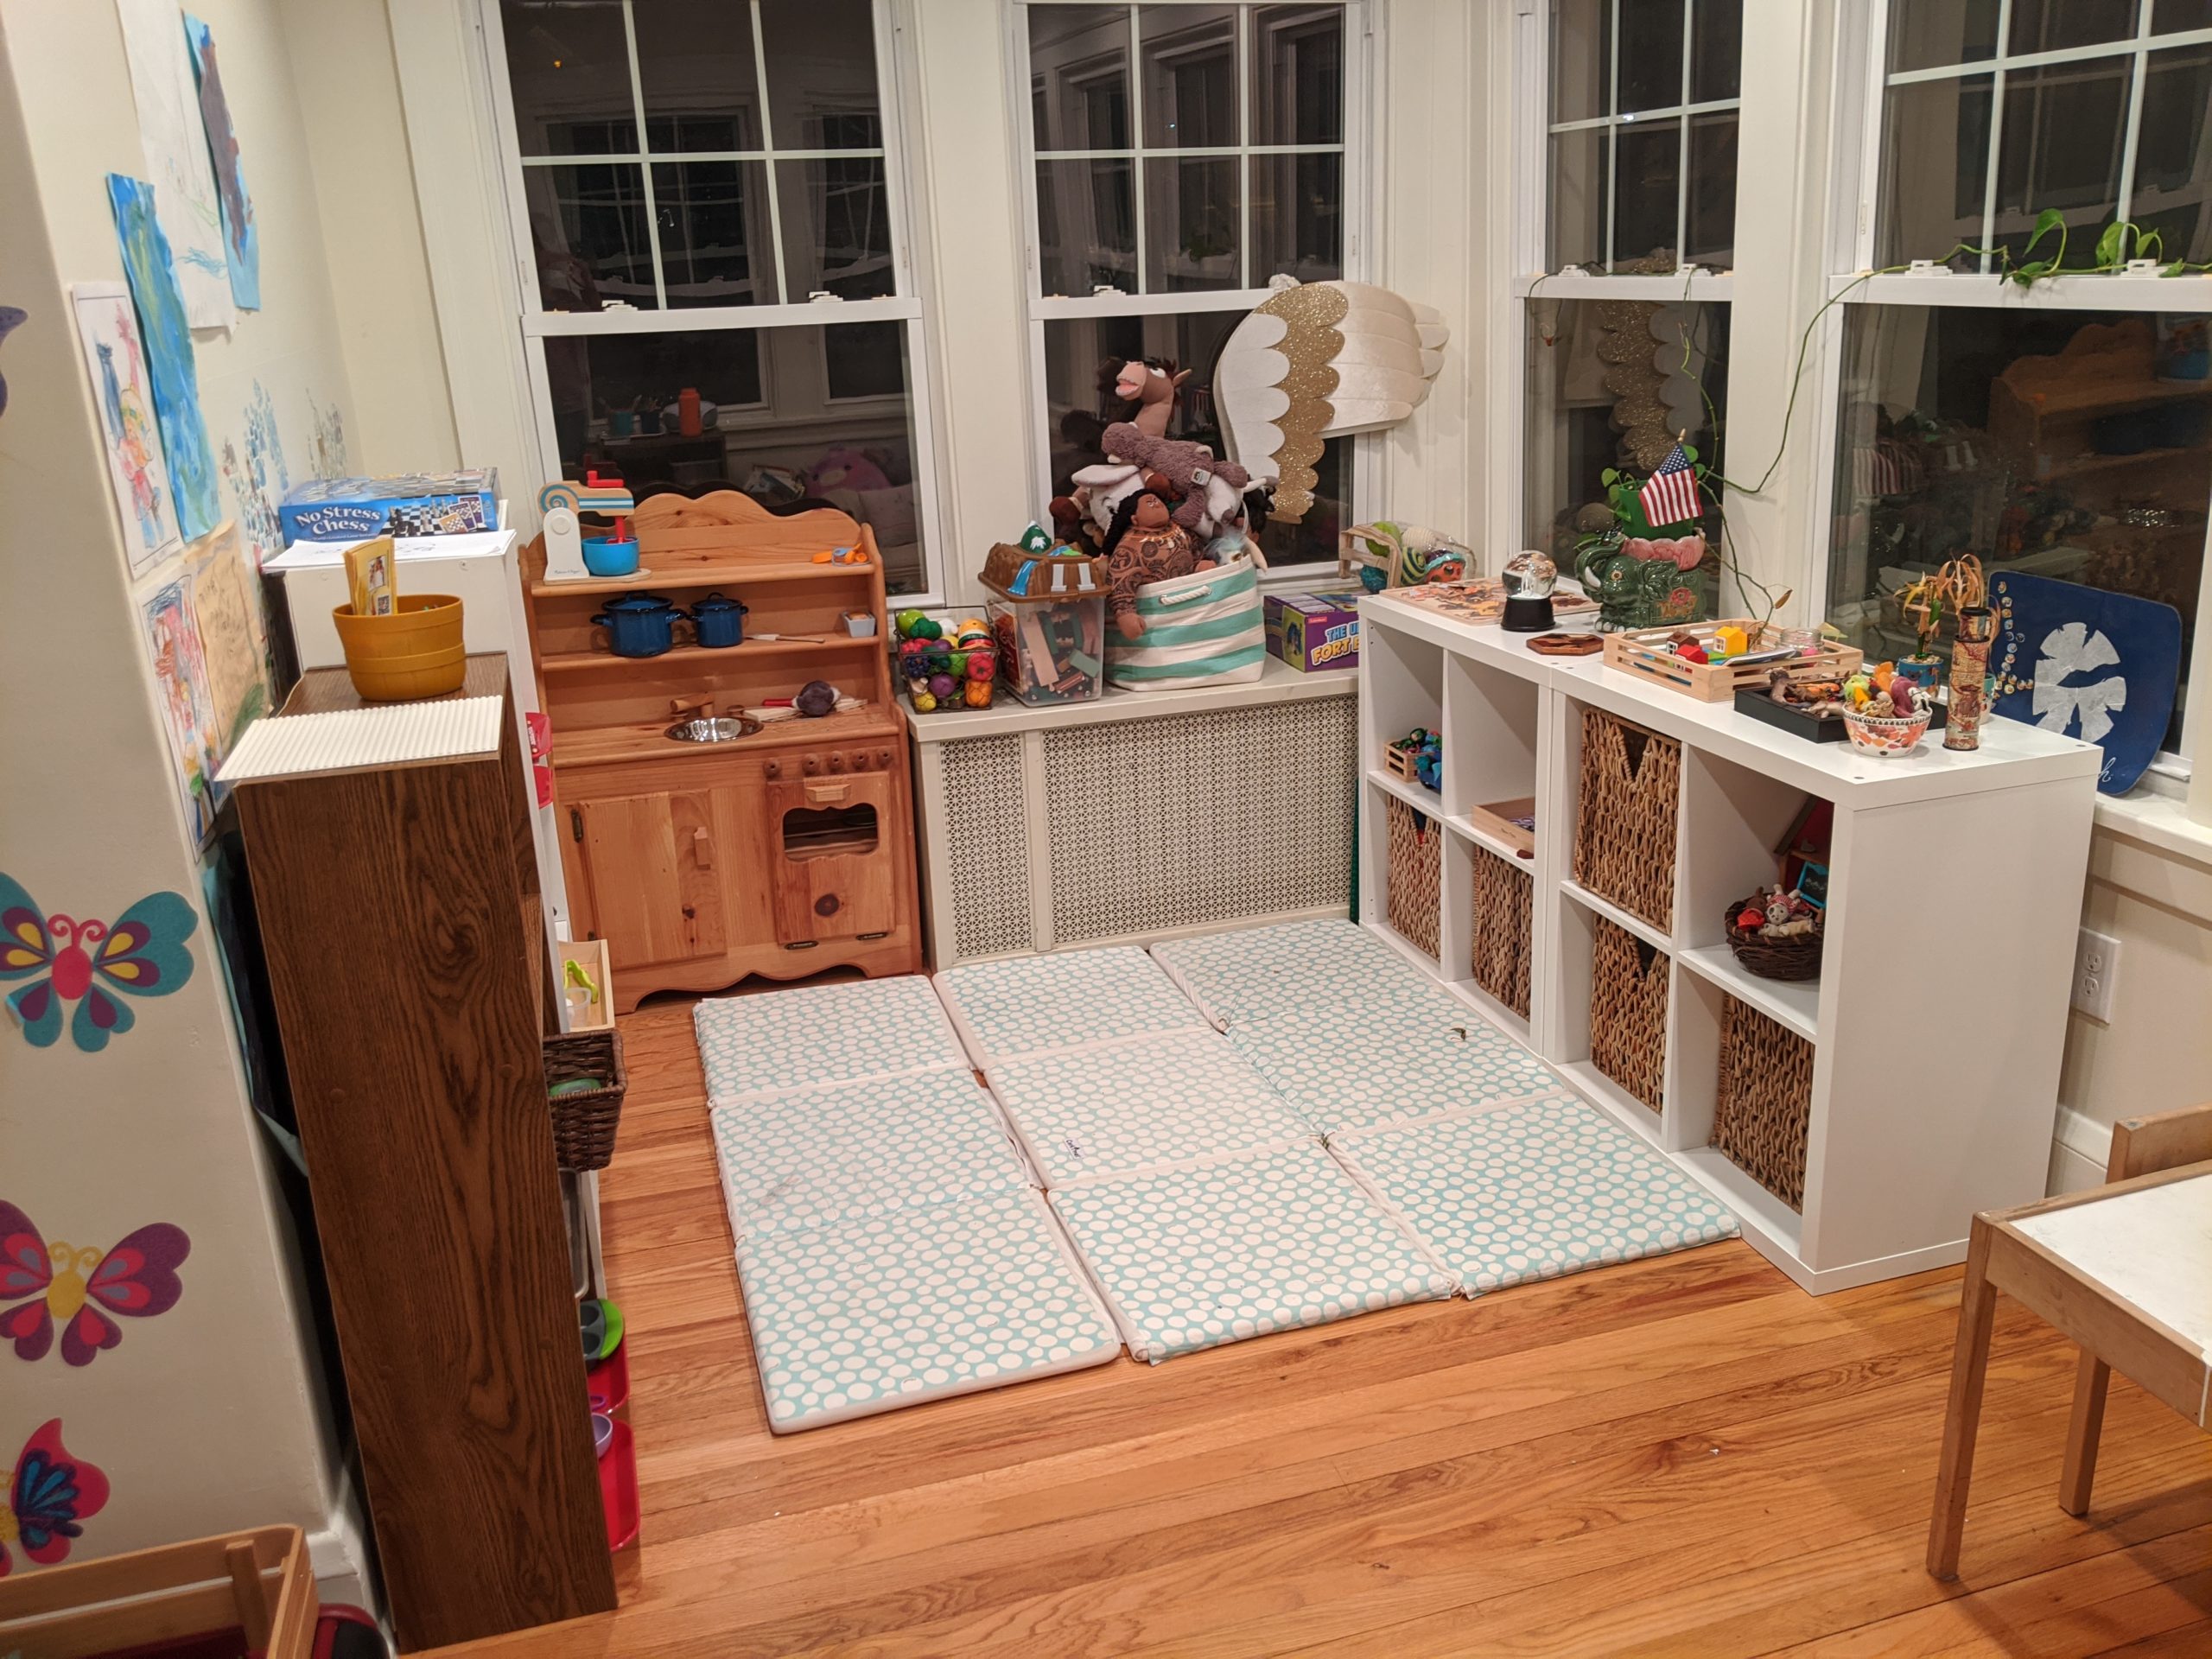 A nicely laid out playroom